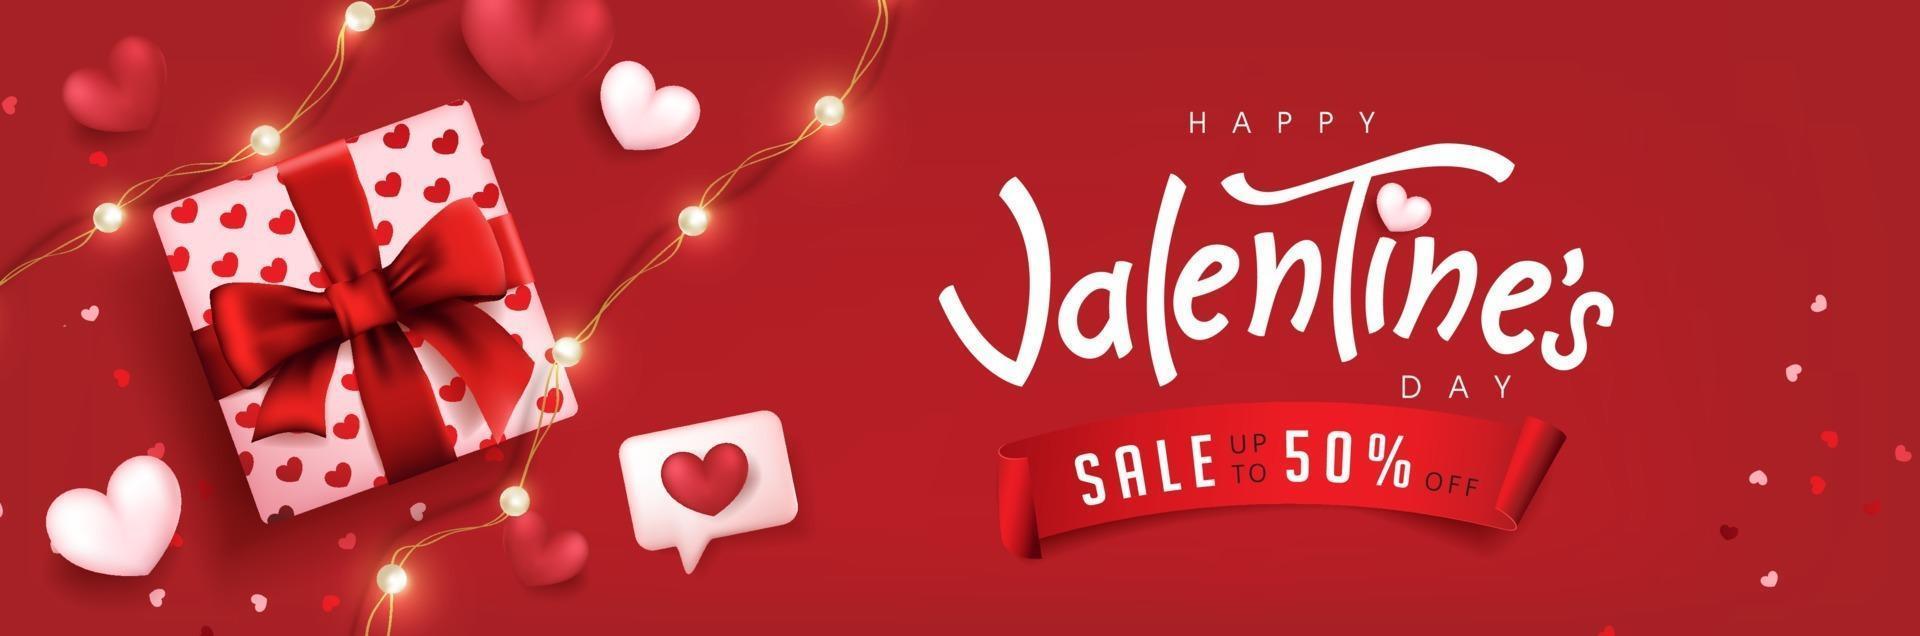 Valentine's day sale poster or banner red backgroud with gift box and hearts. vector